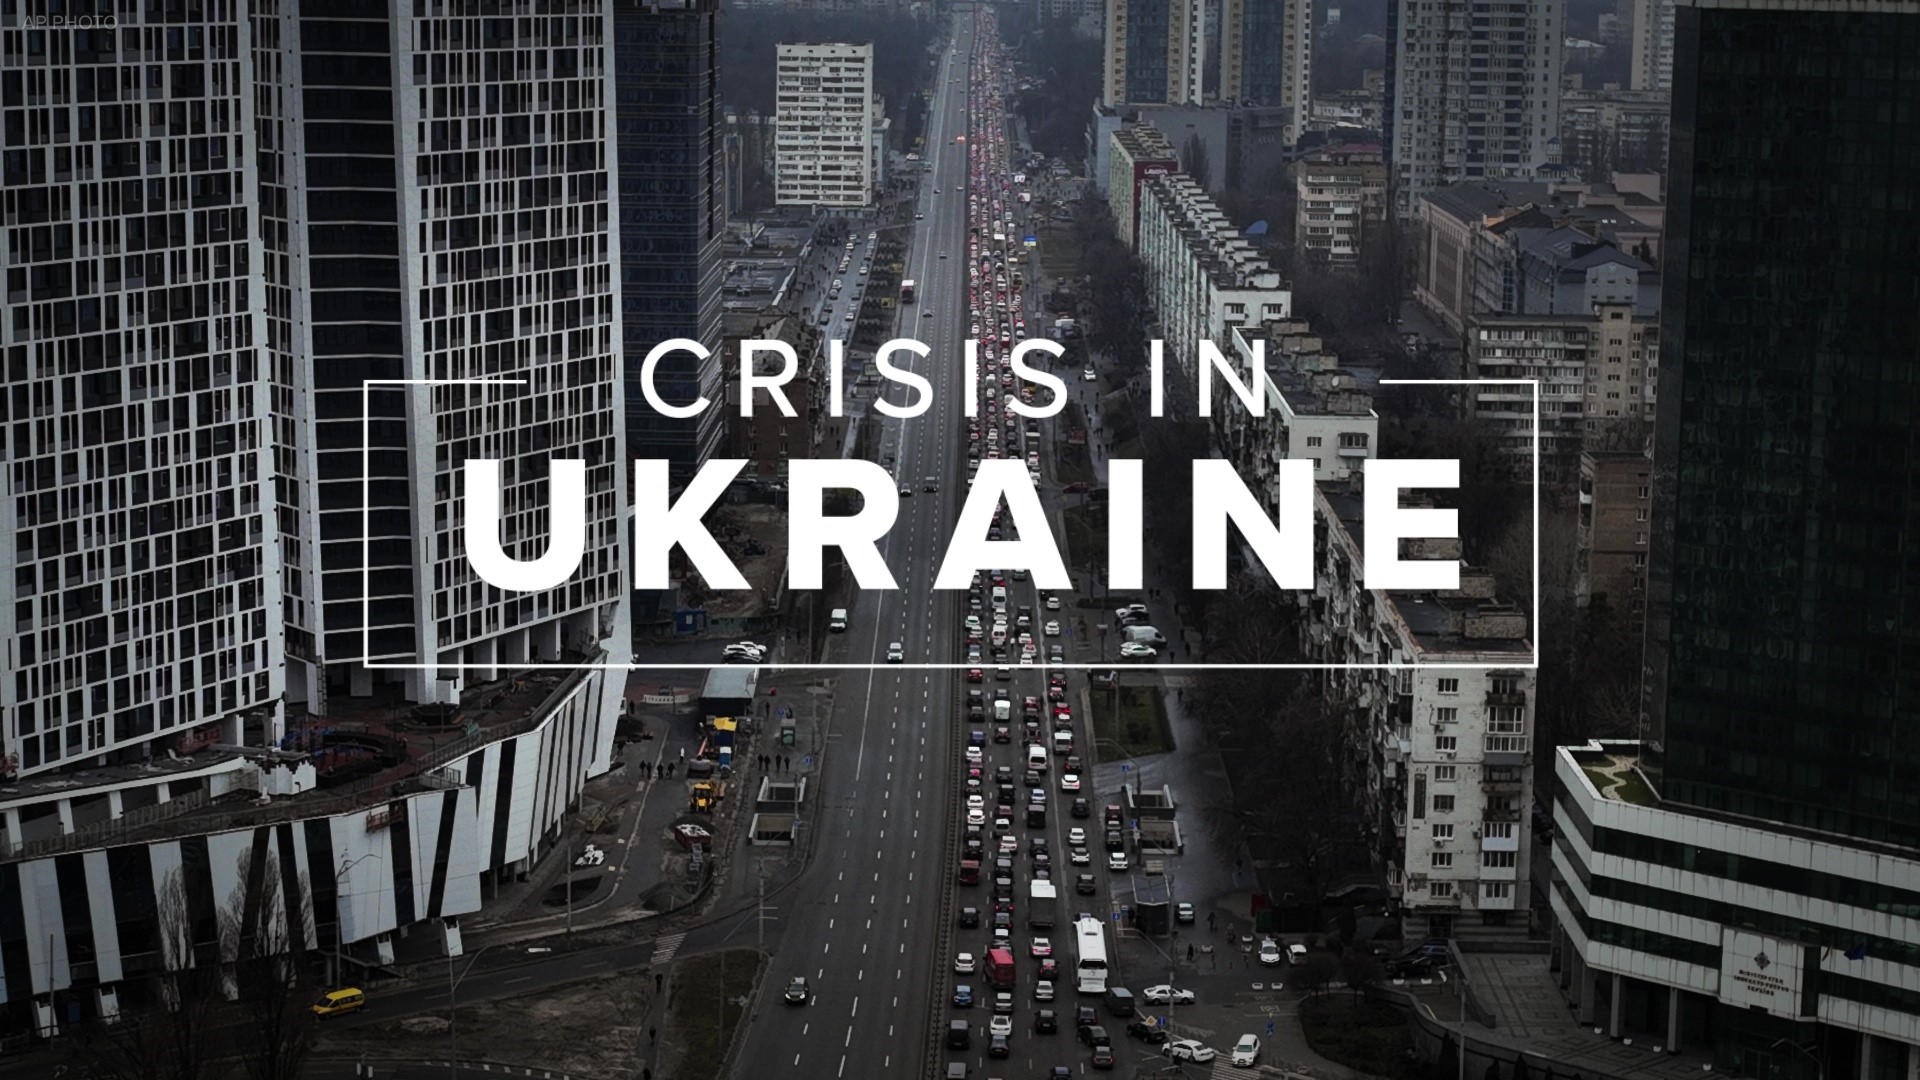 A professor from Bloomsburg University says he did not get much sleep Wednesday night, watching the crisis in Ukraine unfold.